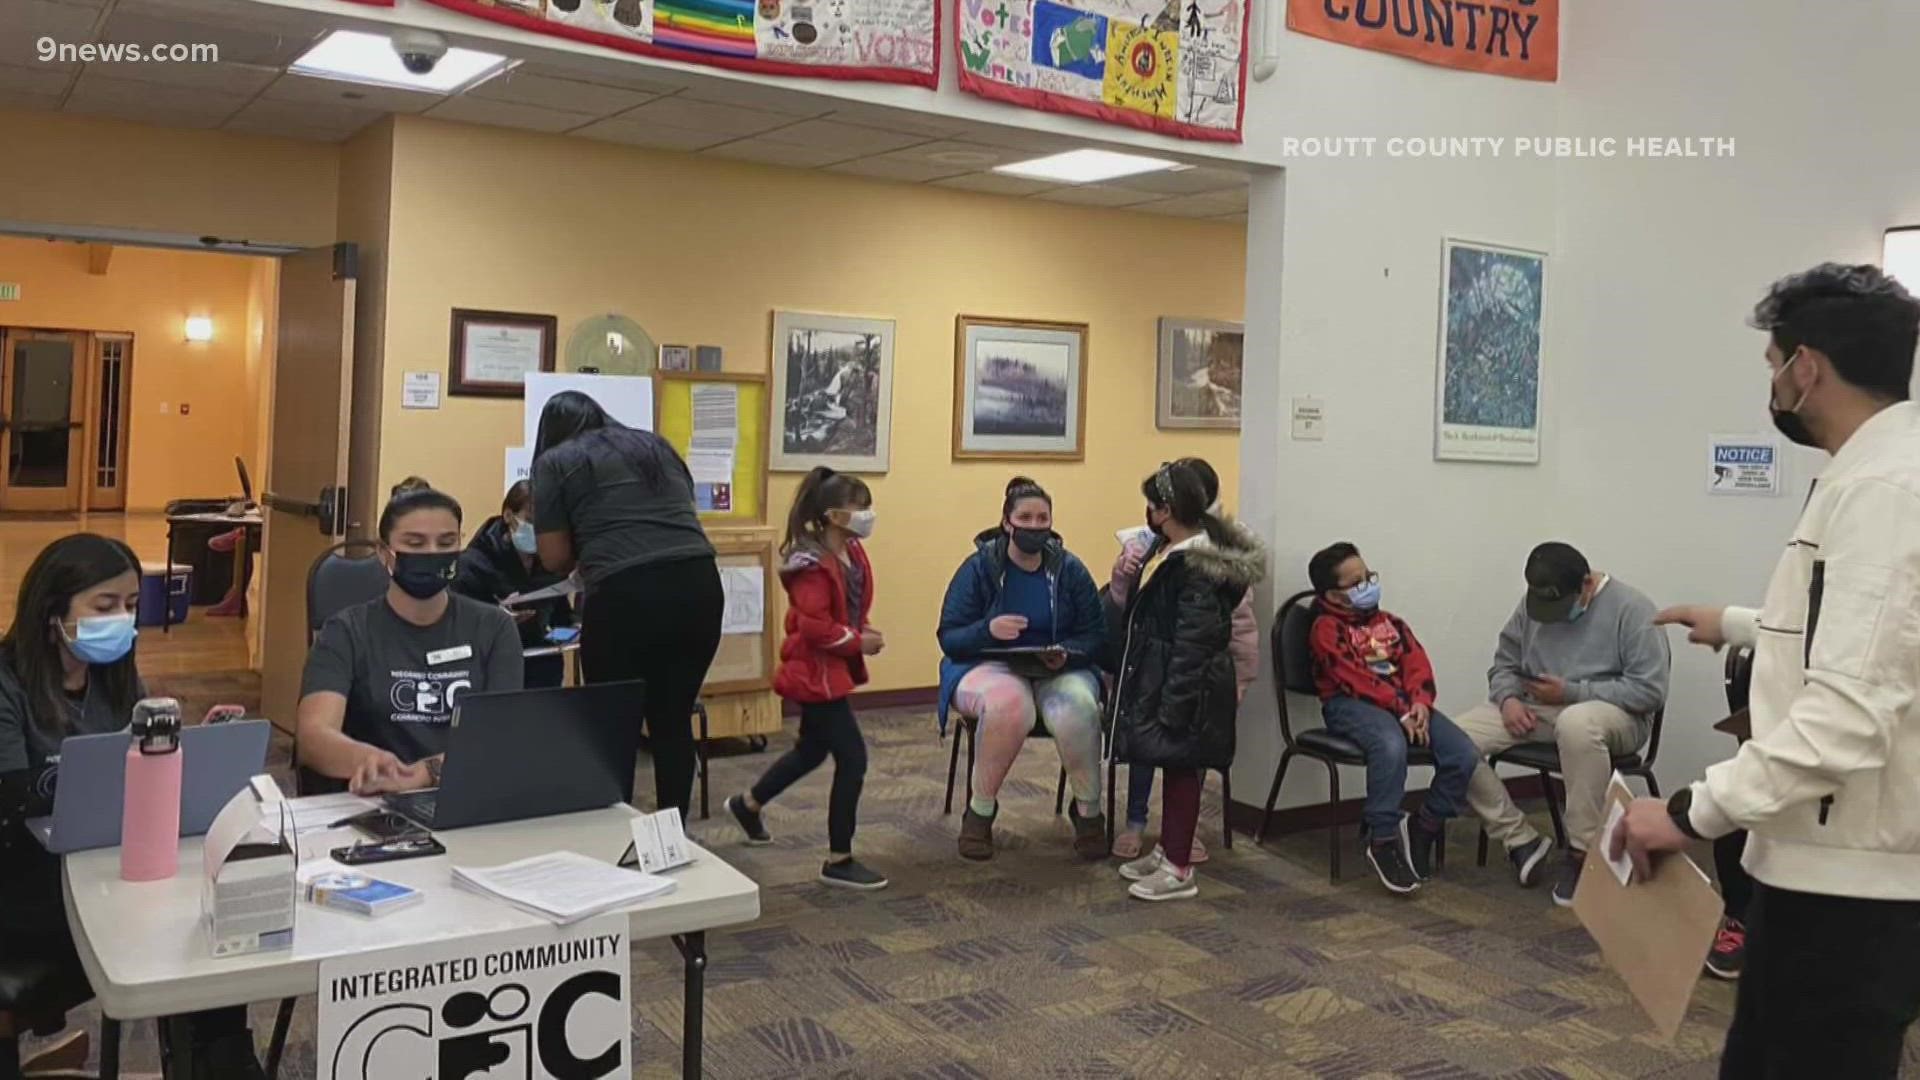 The near cancelation of the clinic in Steamboat Springs came days after the state canceled another equity clinic with Adelante Community Development in Commerce City